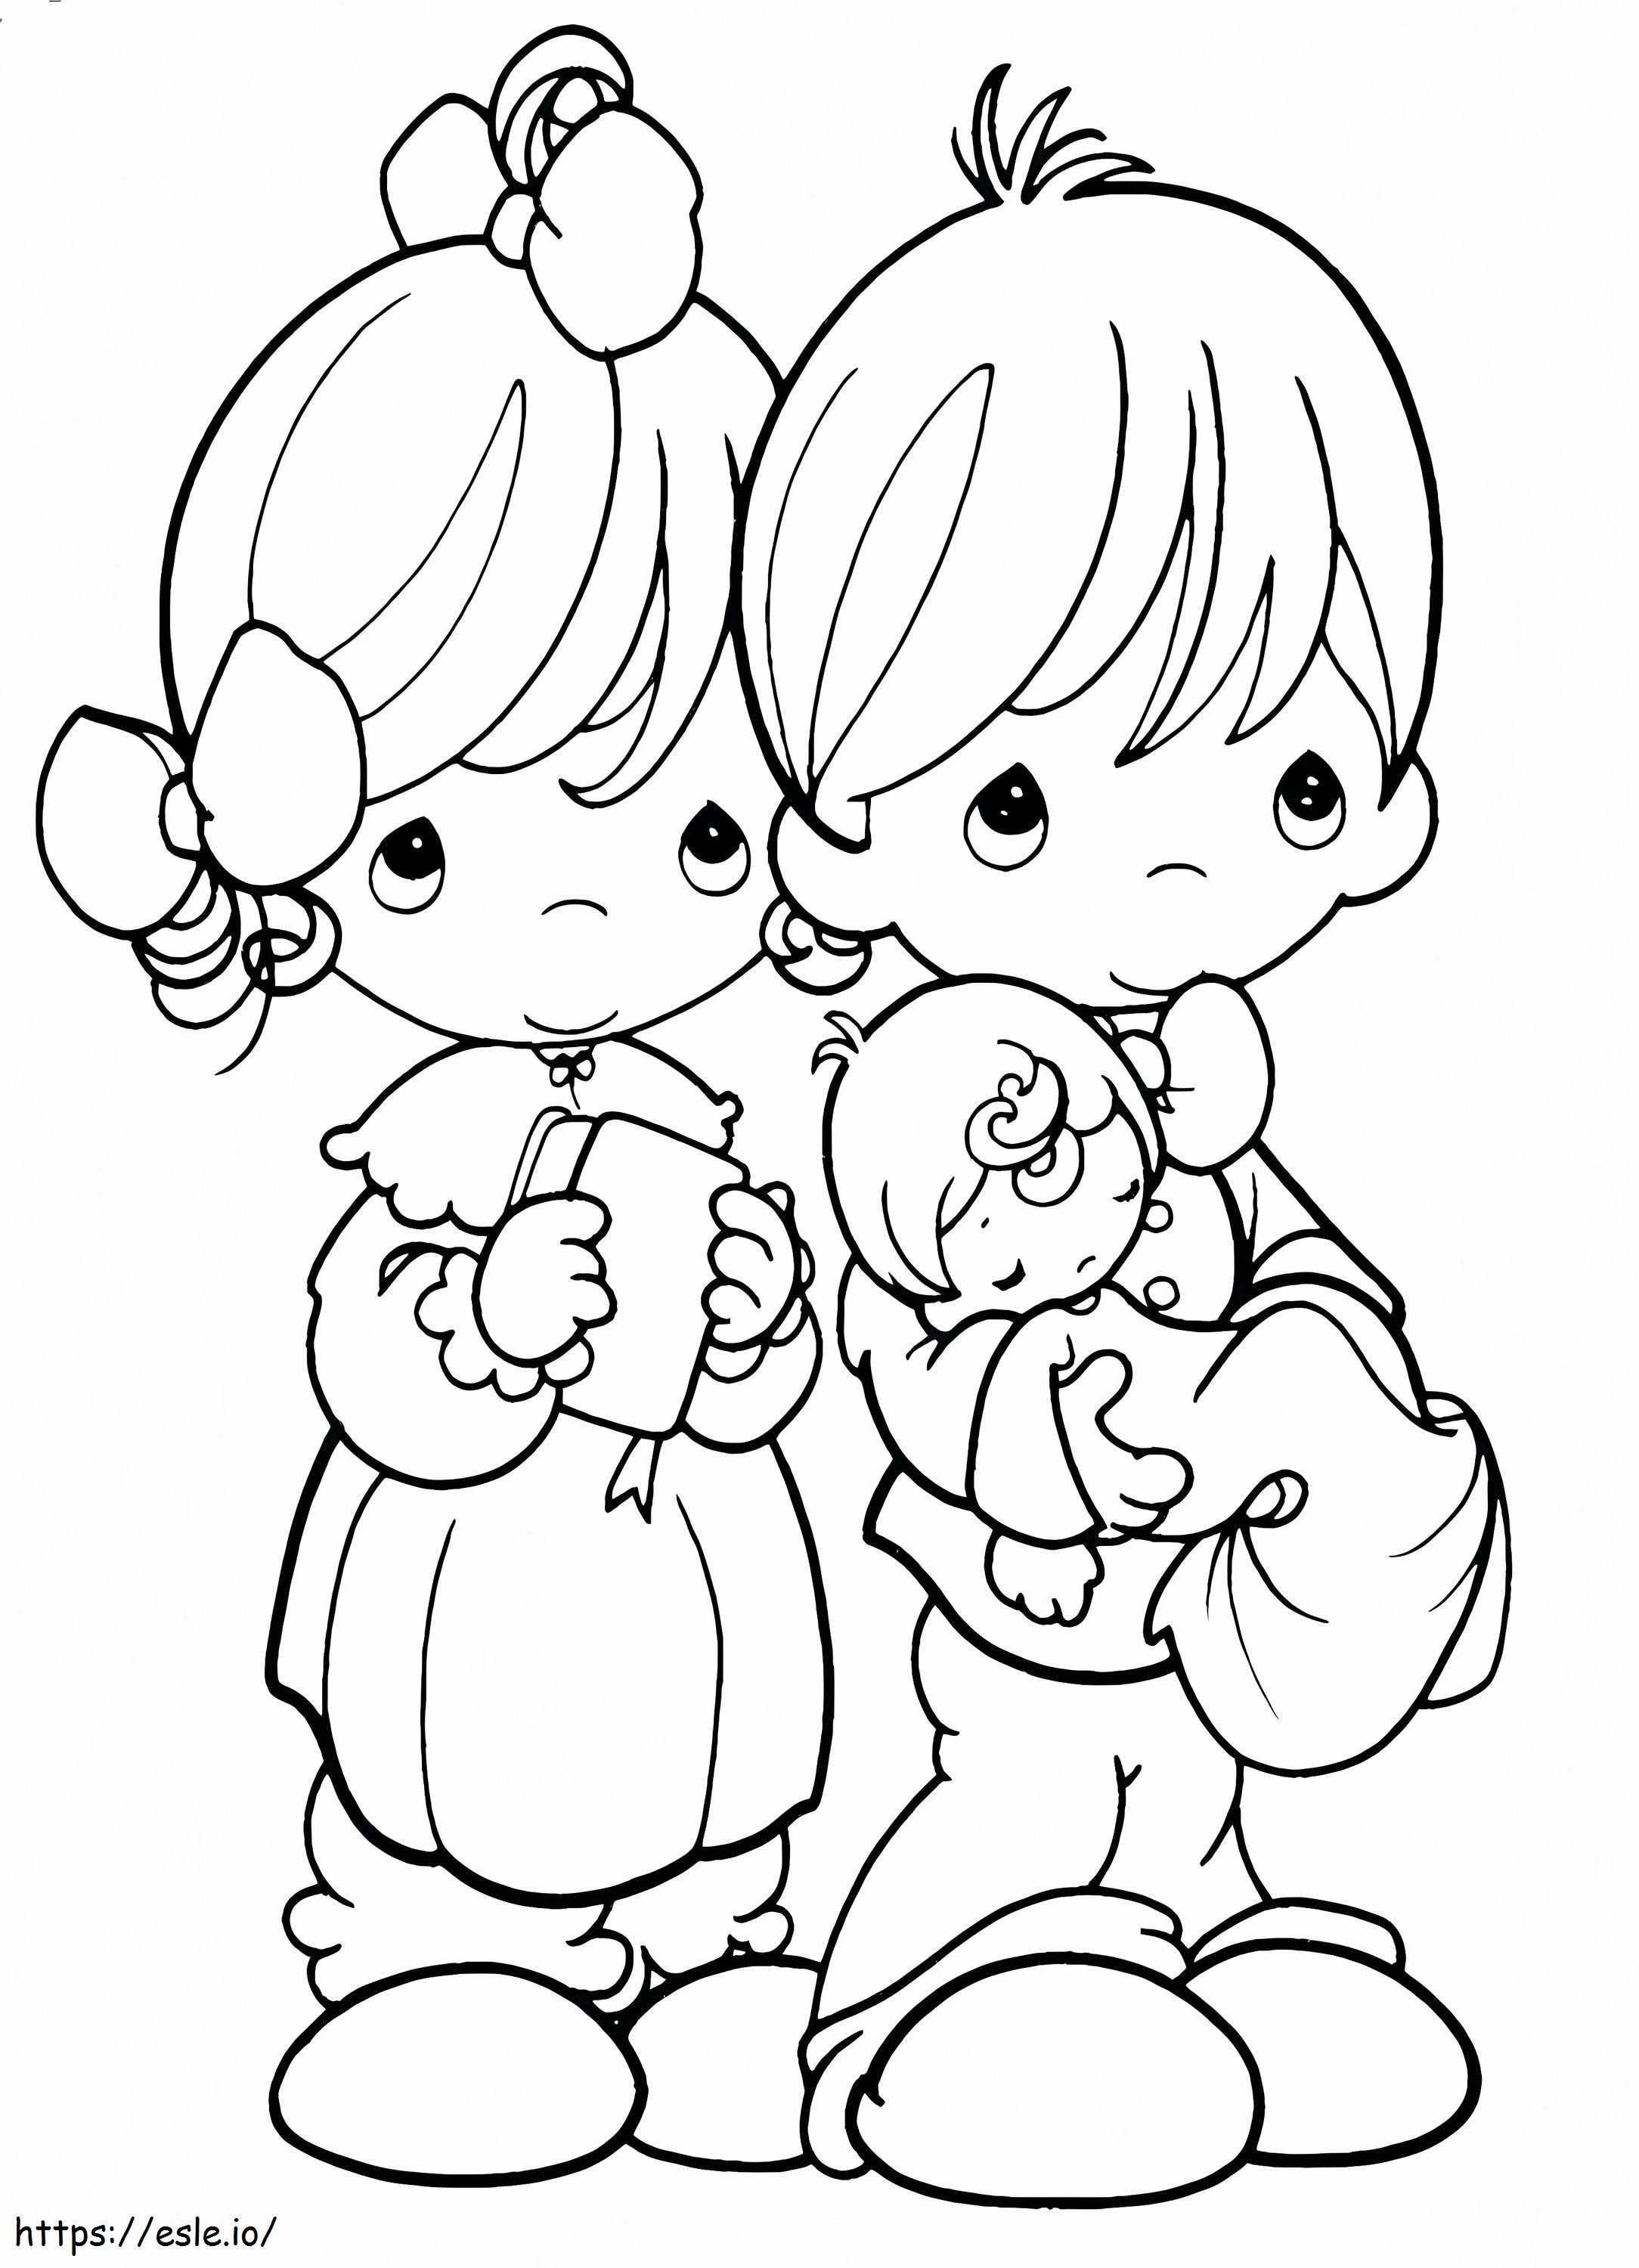 Family printable precus moments holy pictu coloring page